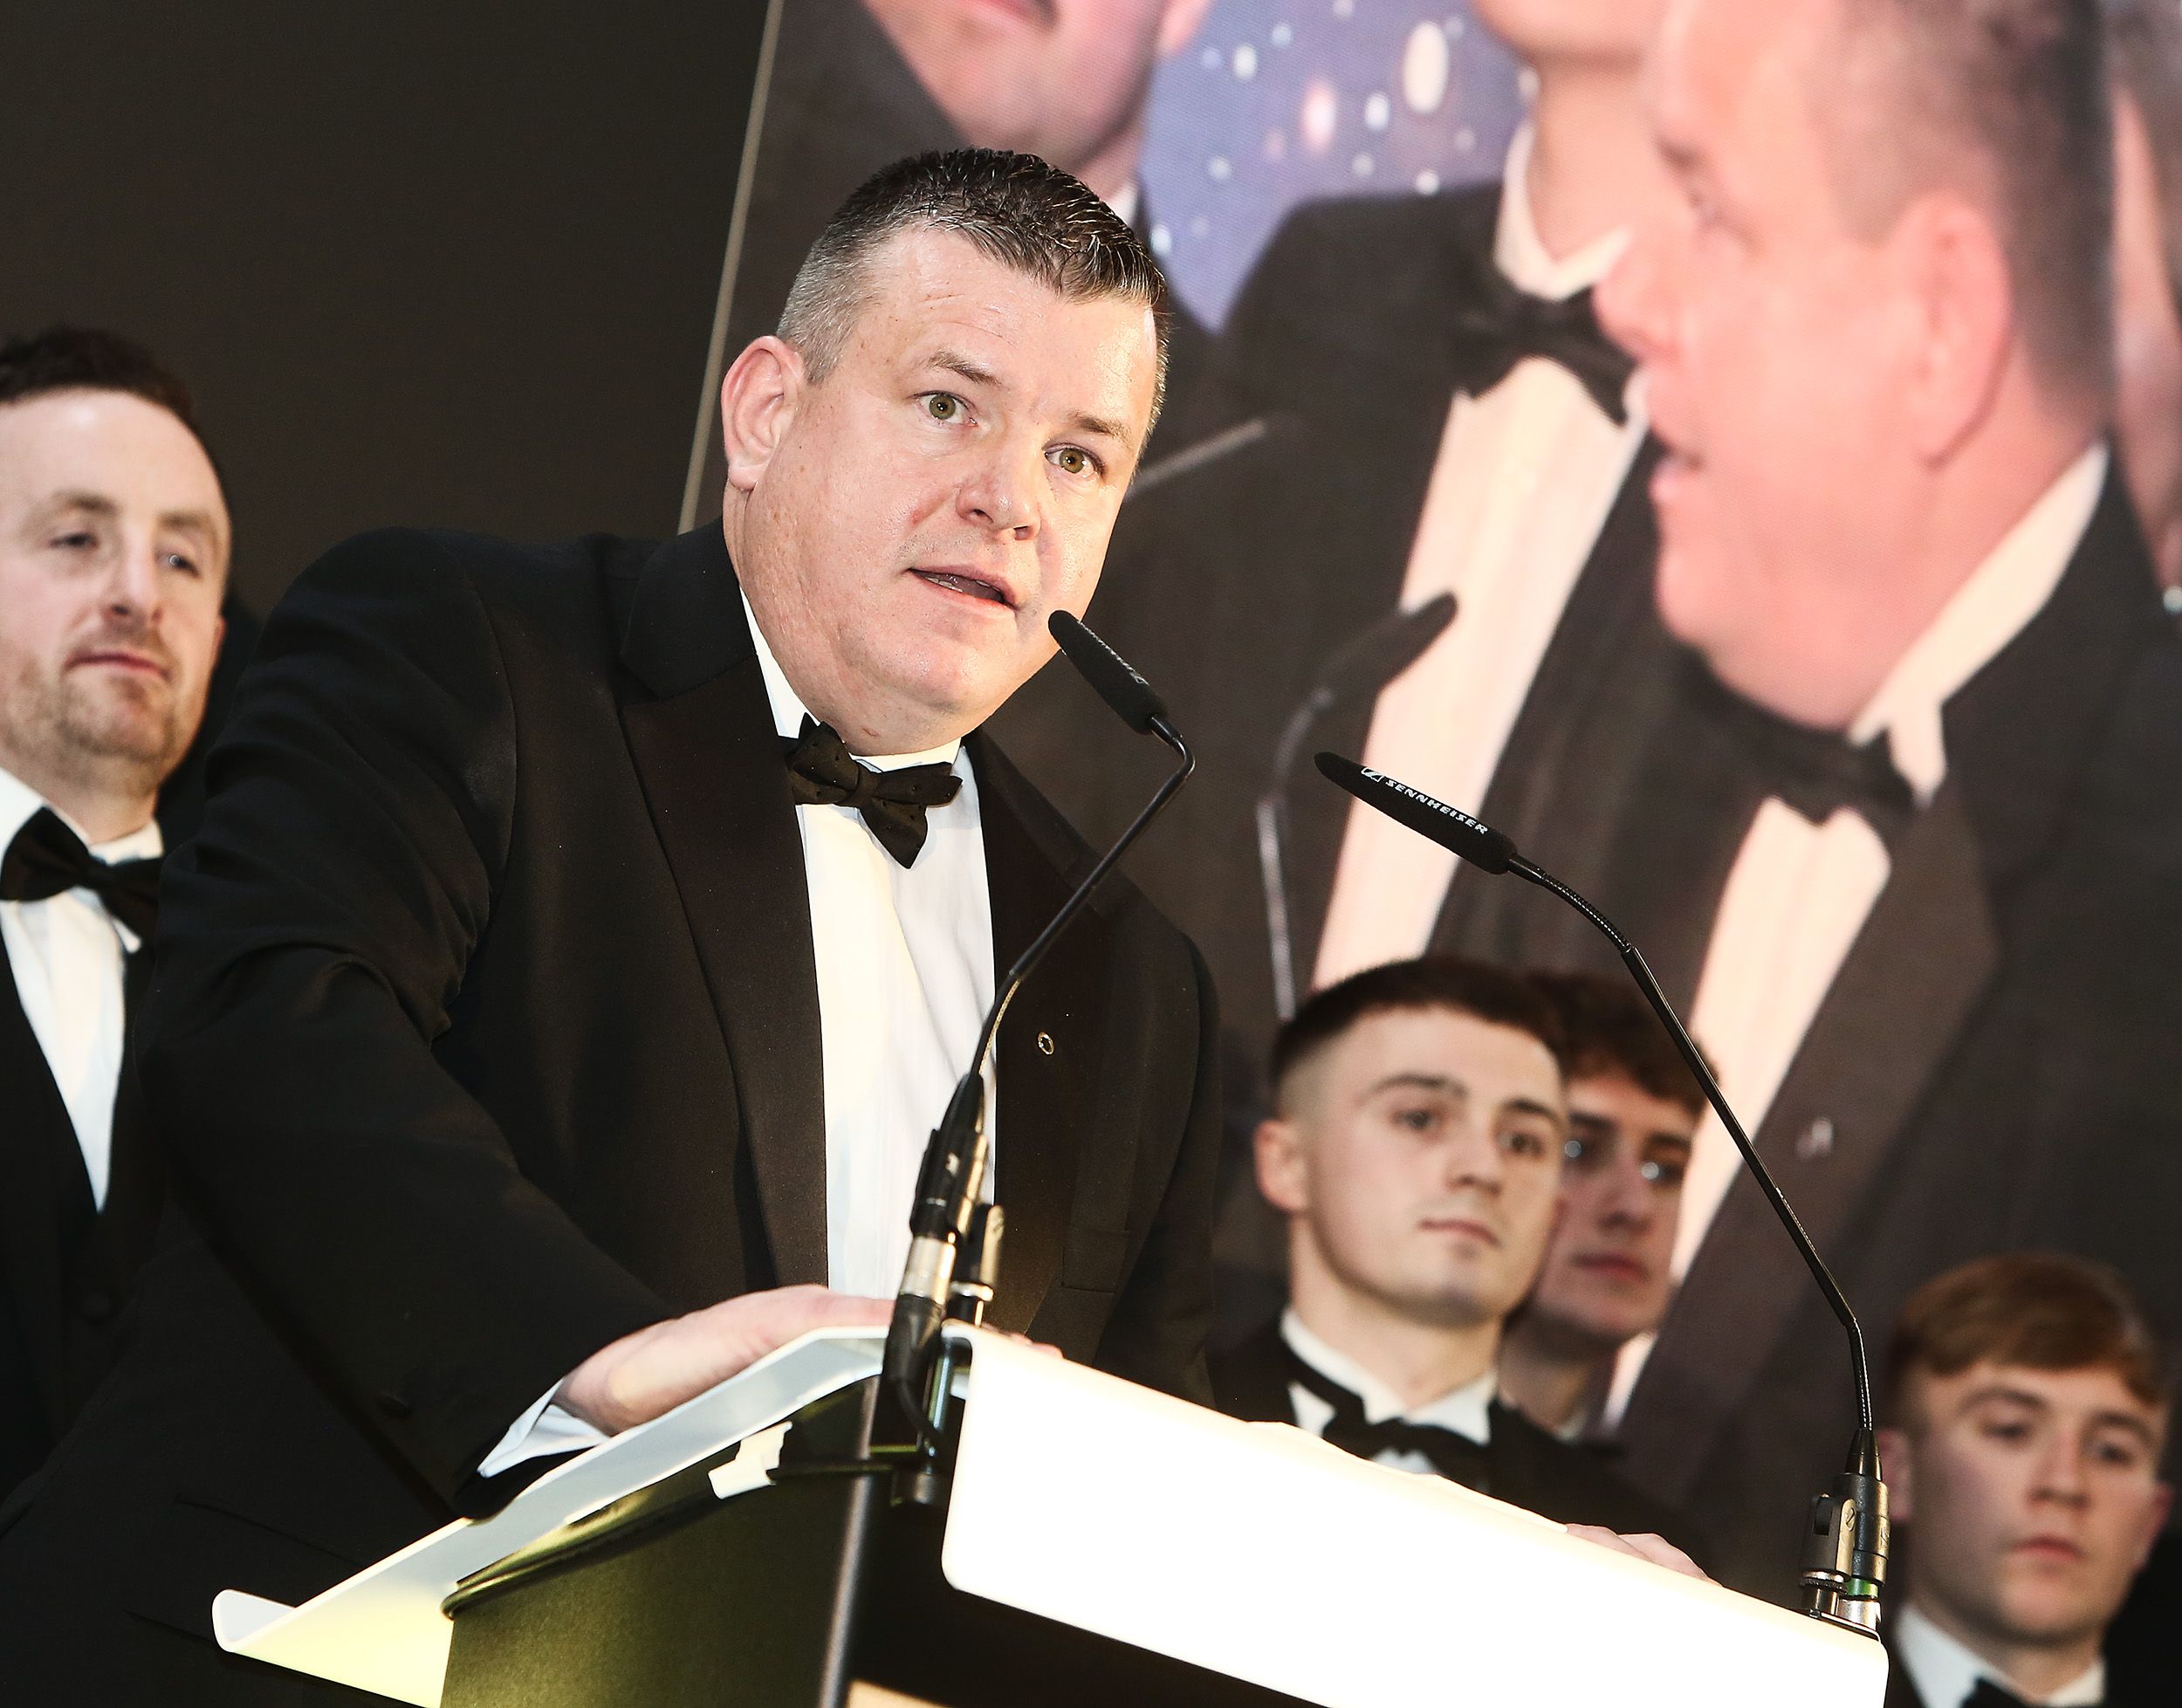 LIFE-AND-DEATH BATTLE WITH COVID: Niall Murphy addressing the Aisling Awards in November 2019